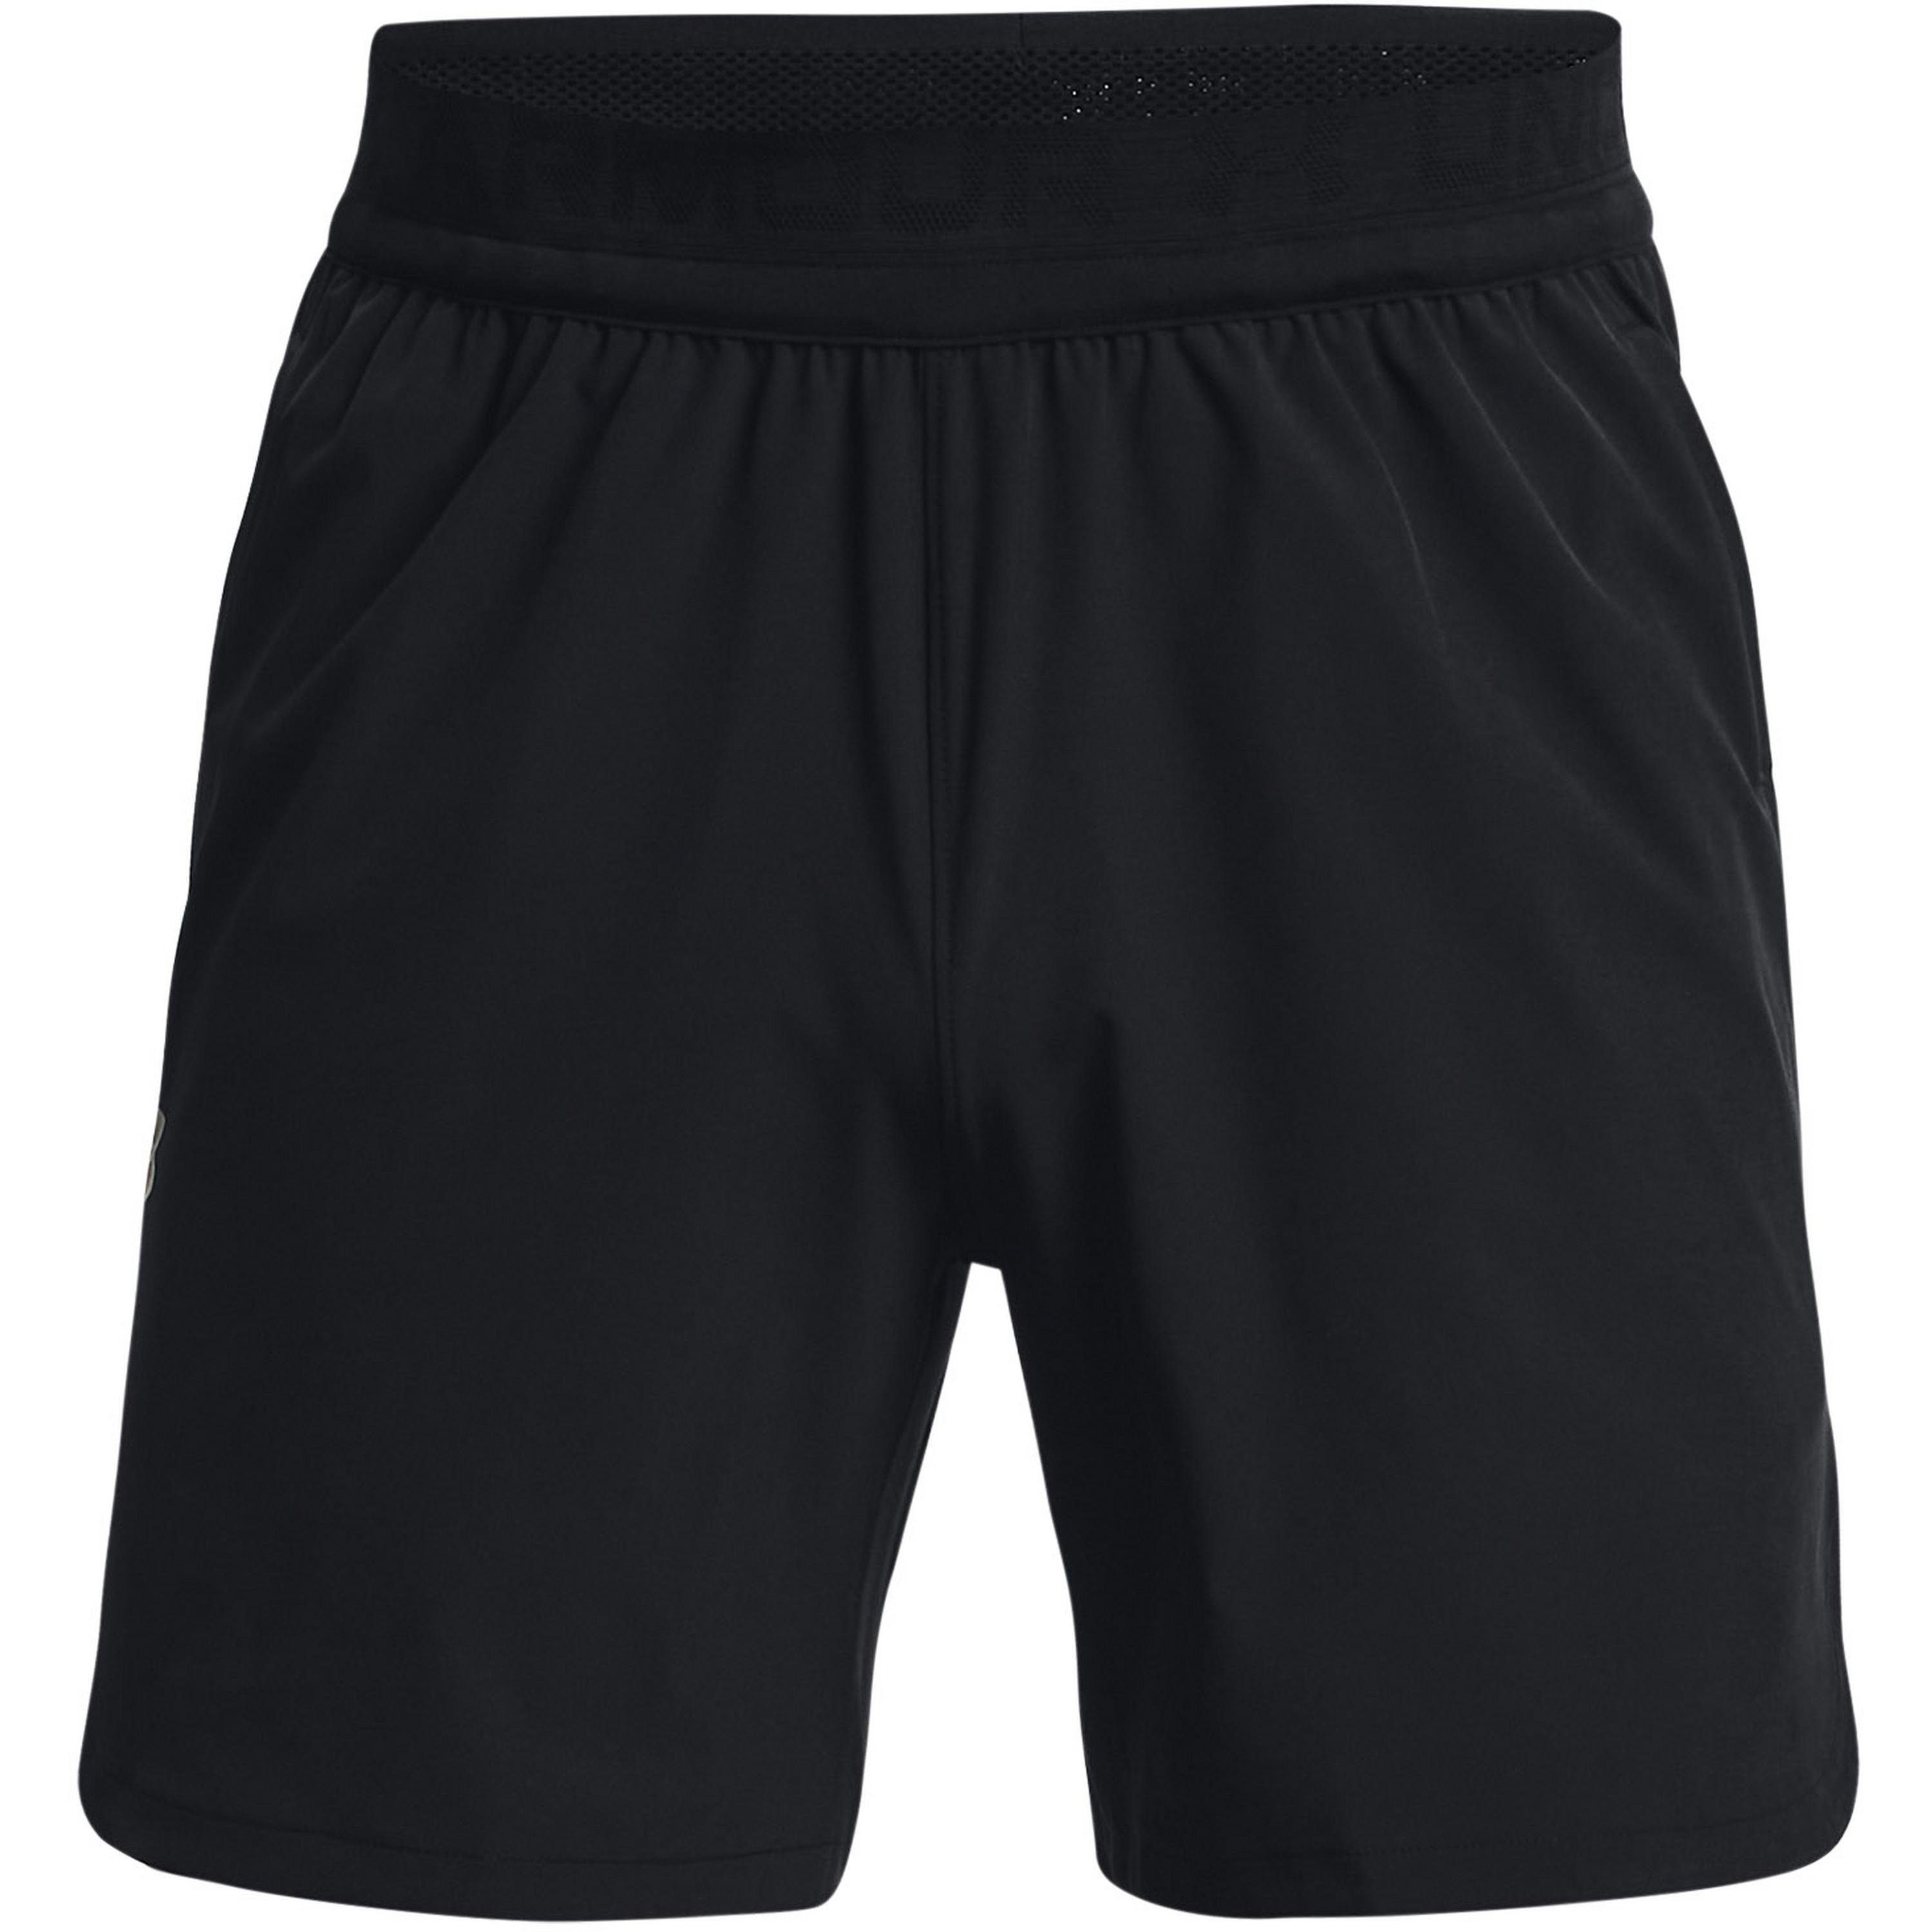 Under Armour® Funktionsshorts Peak black-pitch gray